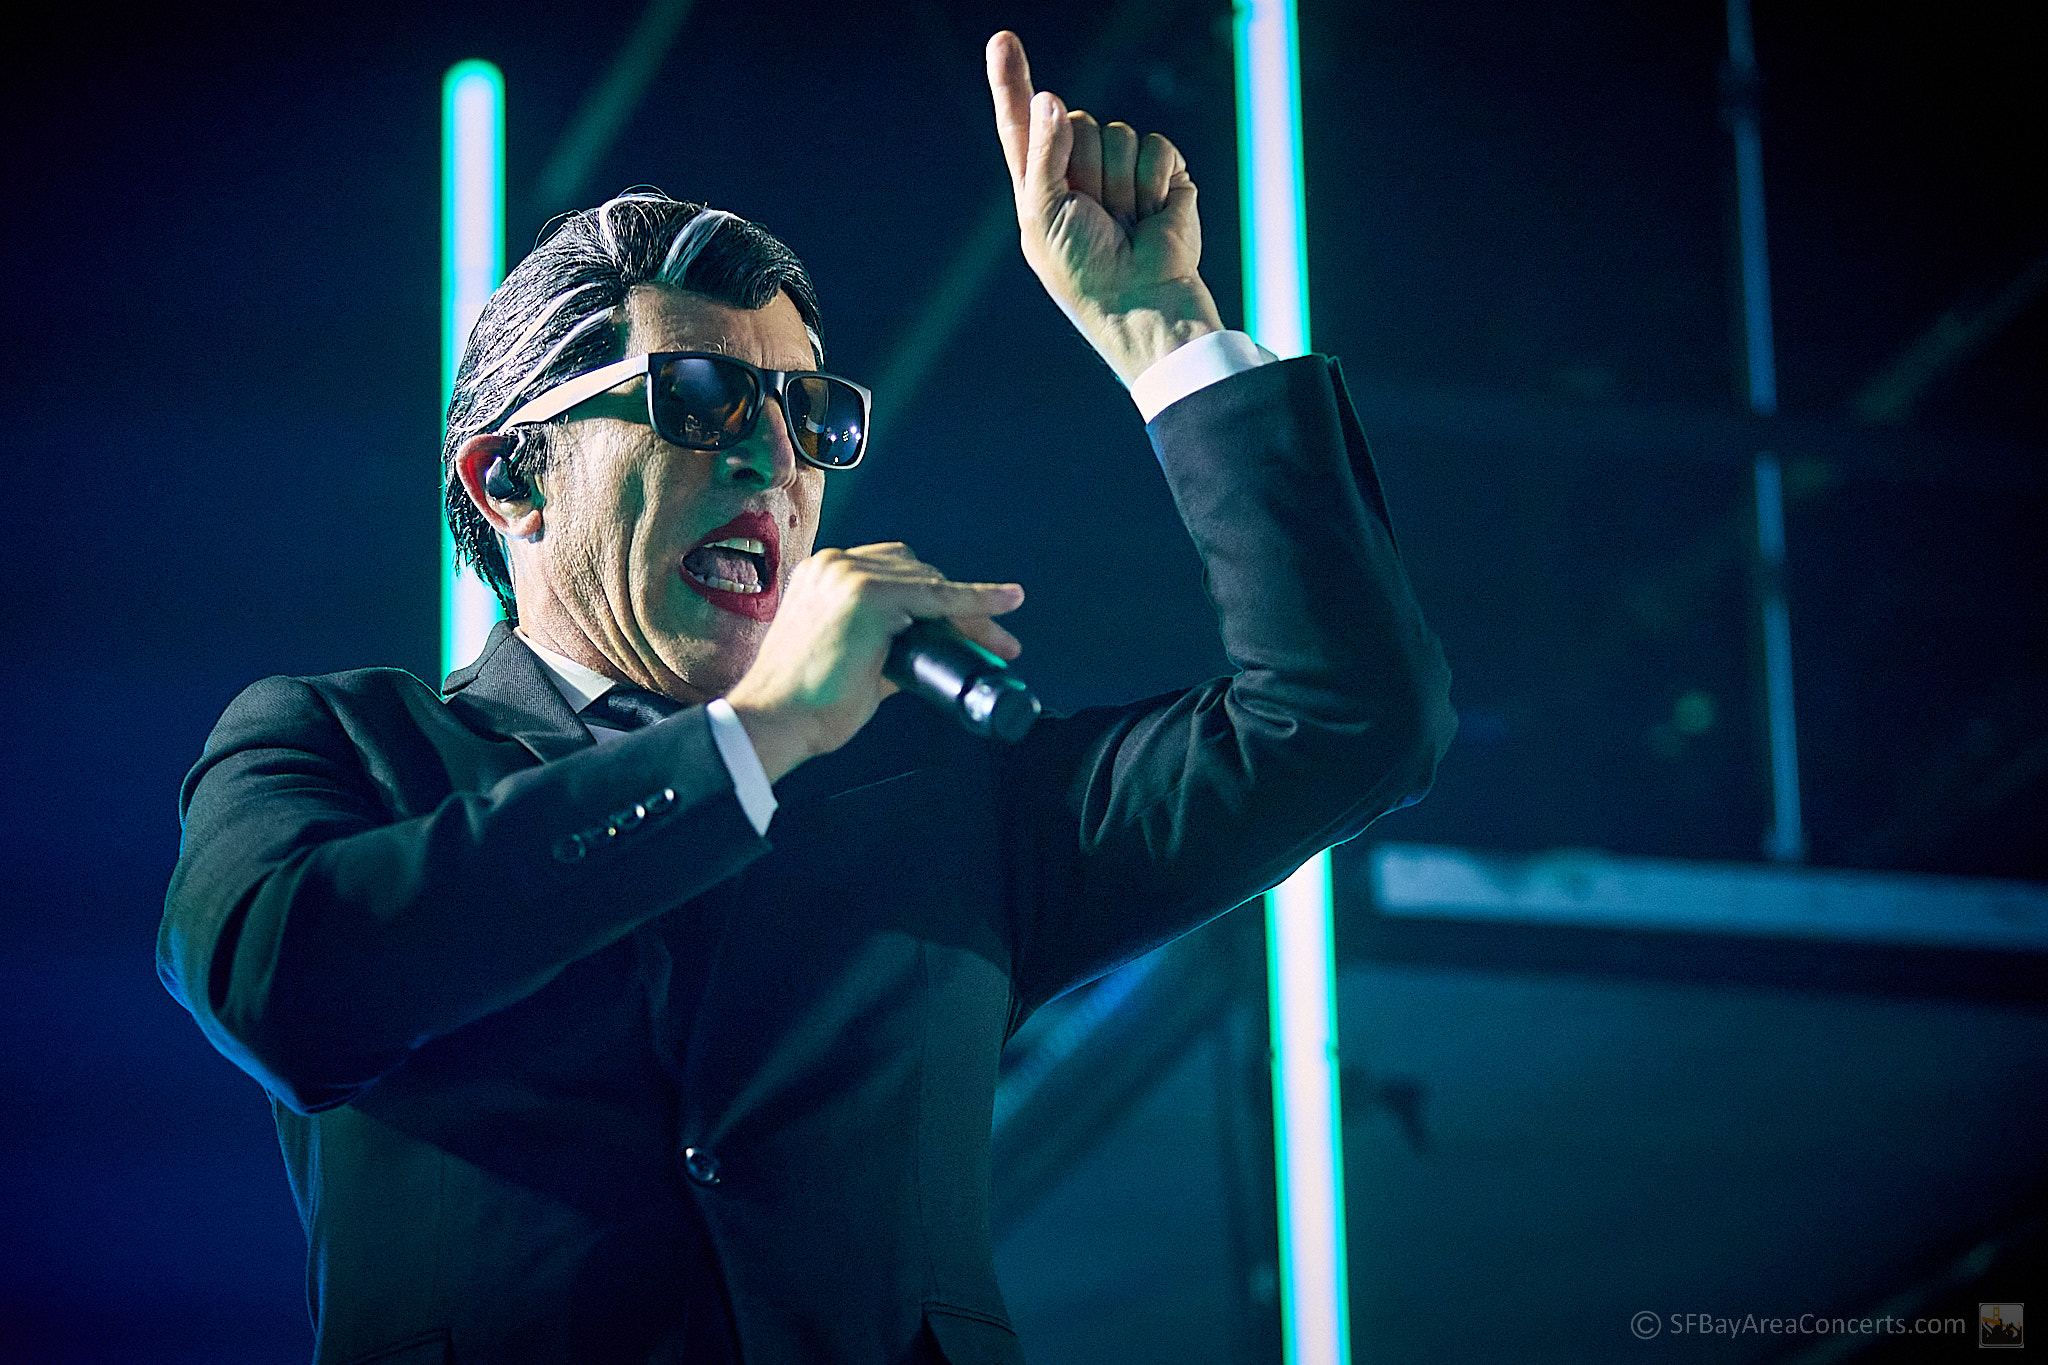 Agent Dick Merkin (Maynard James Keenan) pointing out photographers @ the Warfield (Photo: Kevin Keating)